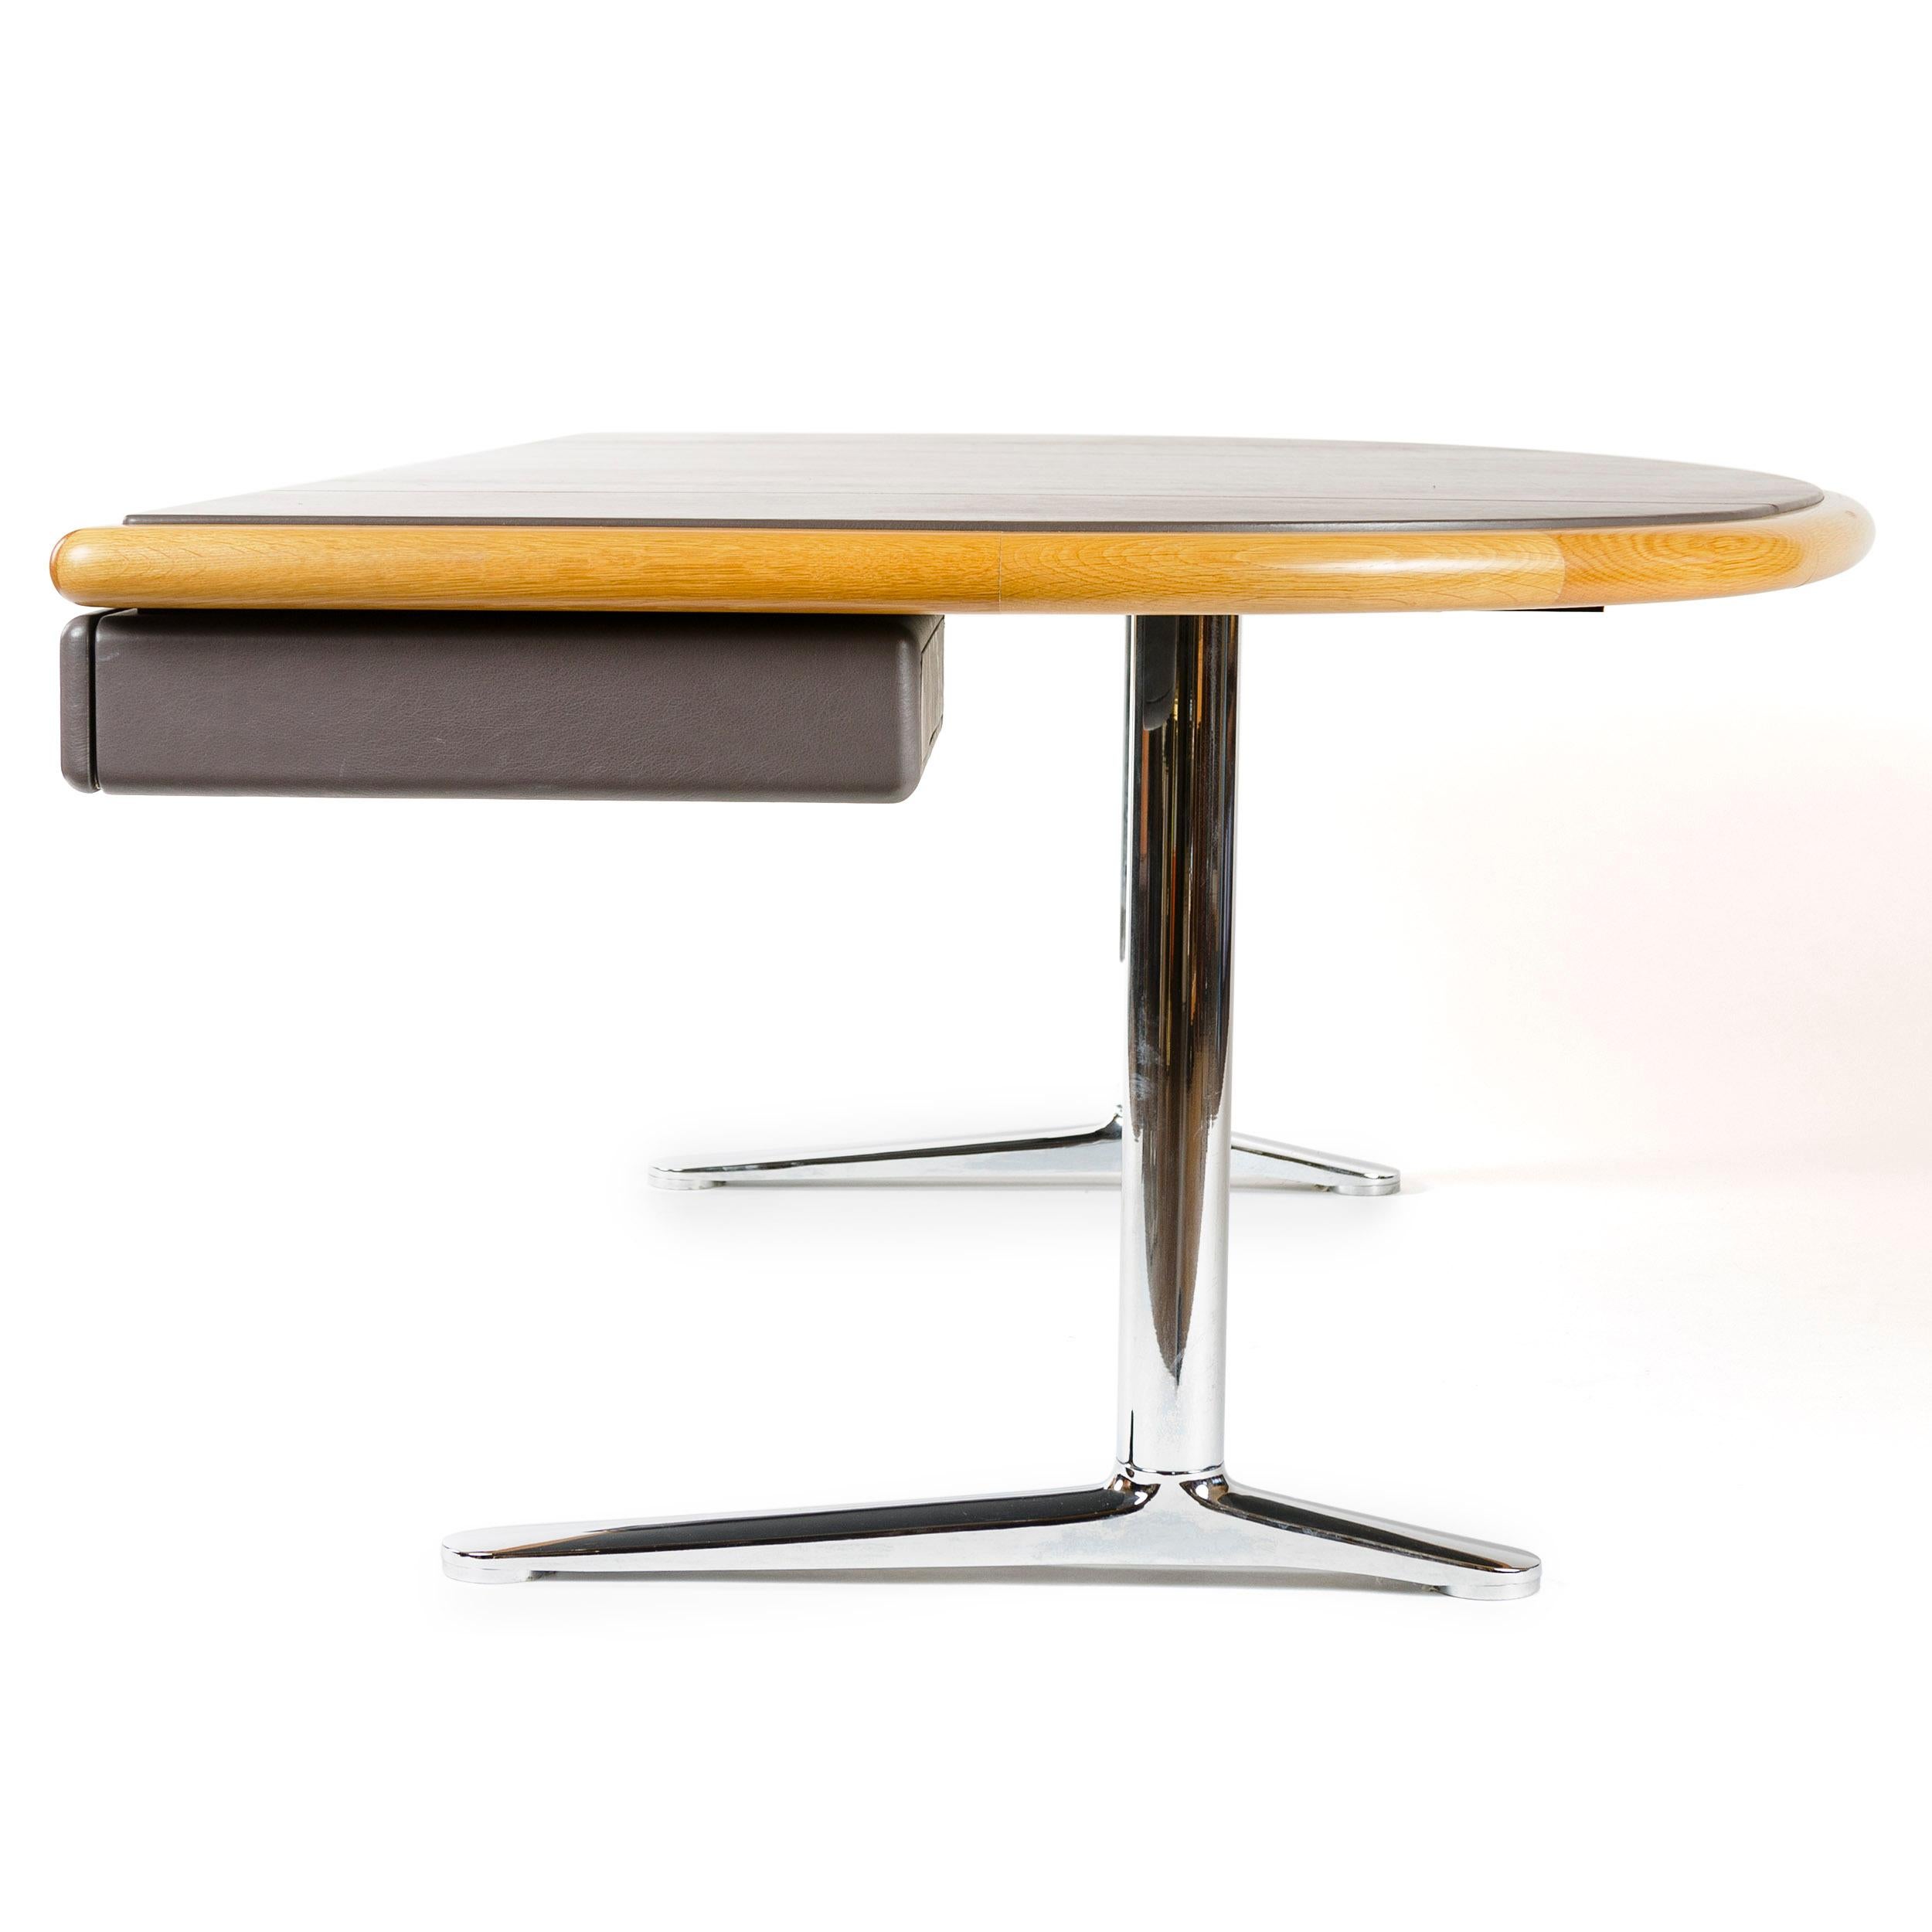 1970s Executive Office Desk by Warren Platner for Knoll In Good Condition For Sale In Sagaponack, NY